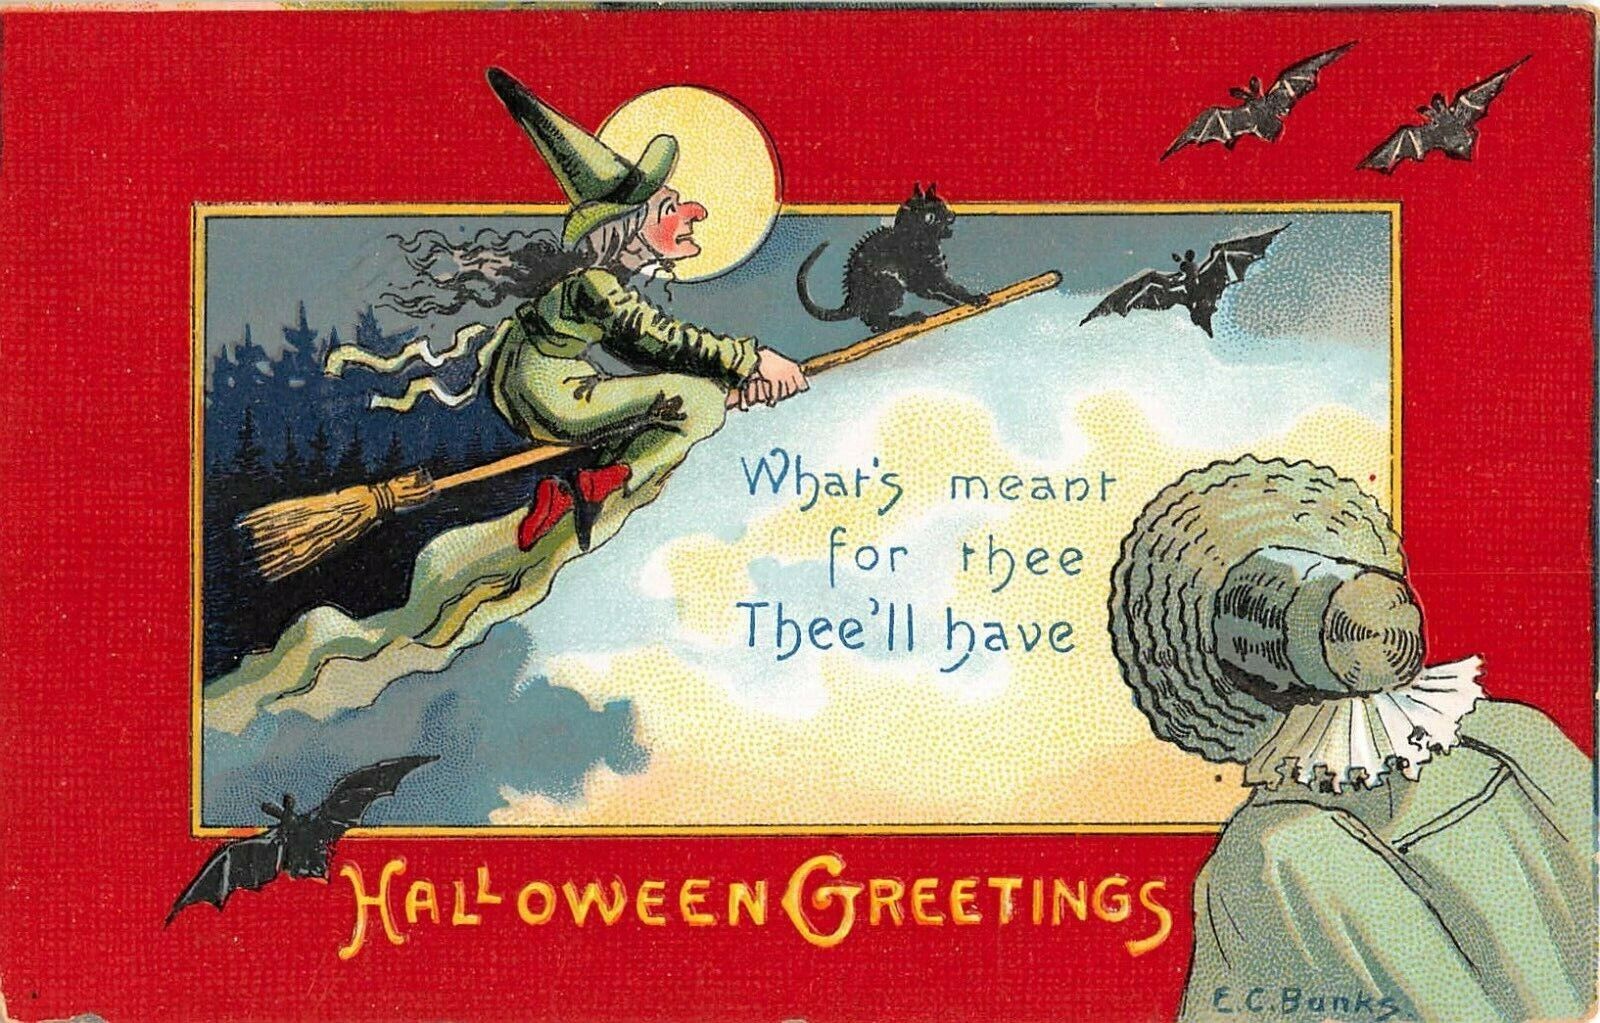 1909 sgd. Banks Witch & Black Cat on Broom Bats Halloween Greetings post card